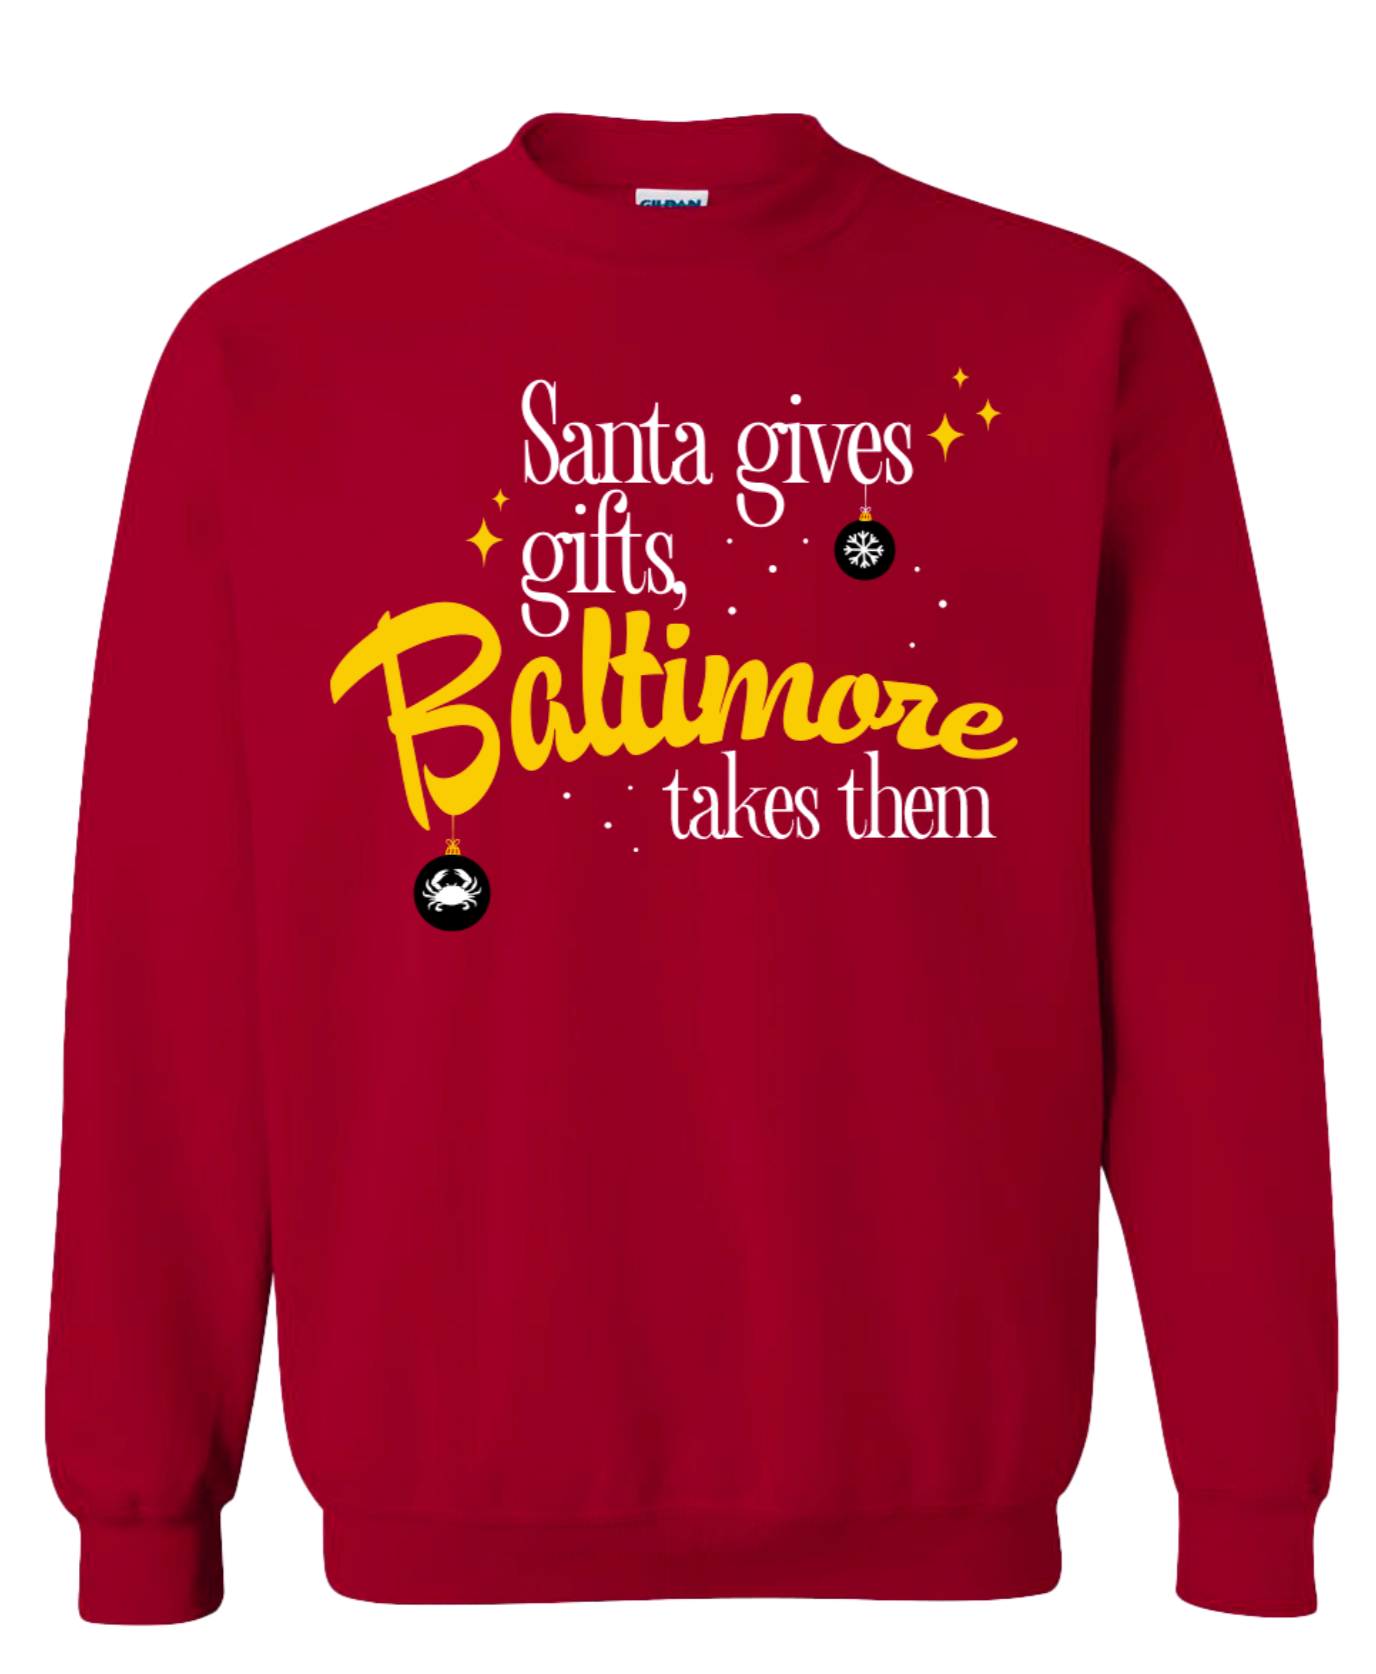 *PRE-ORDER* Baltimore Takes Them (Cherry Red) / Crew Sweatshirt (Estimated Ship Date 12/12) - Route One Apparel